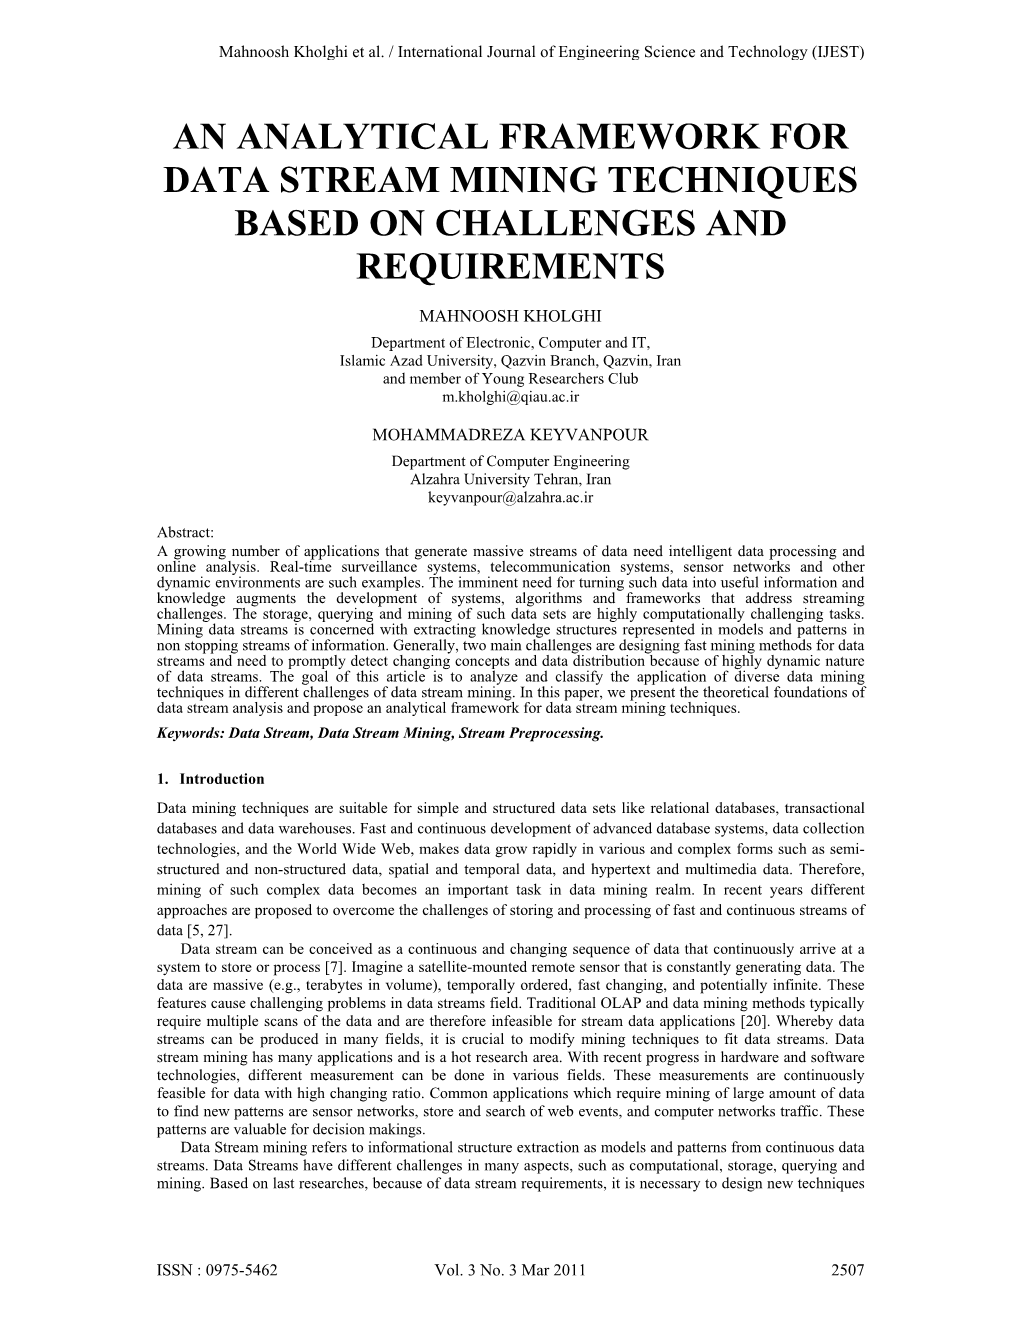 An Analytical Framework for Data Stream Mining Techniques Based on Challenges and Requirements